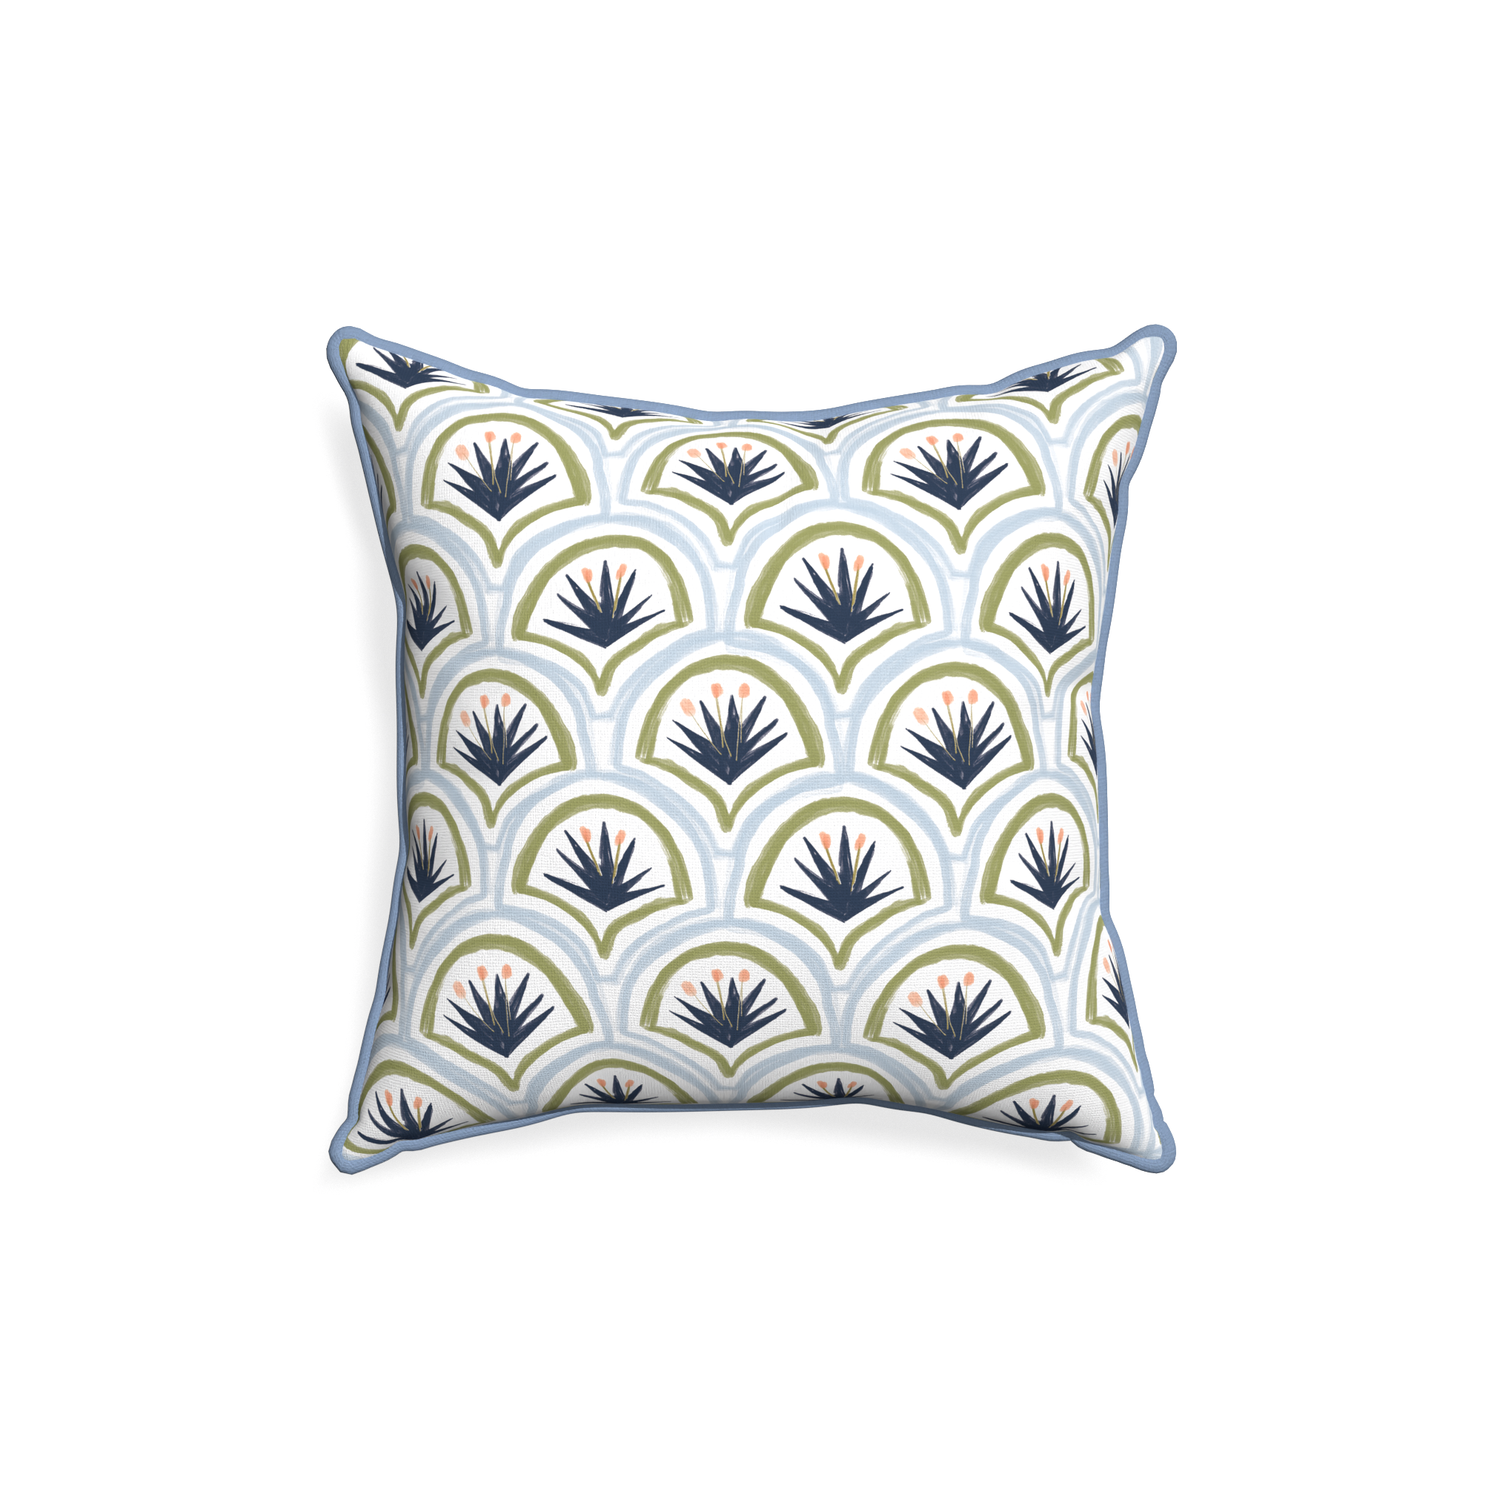 18-square thatcher midnight custom art deco palm patternpillow with sky piping on white background